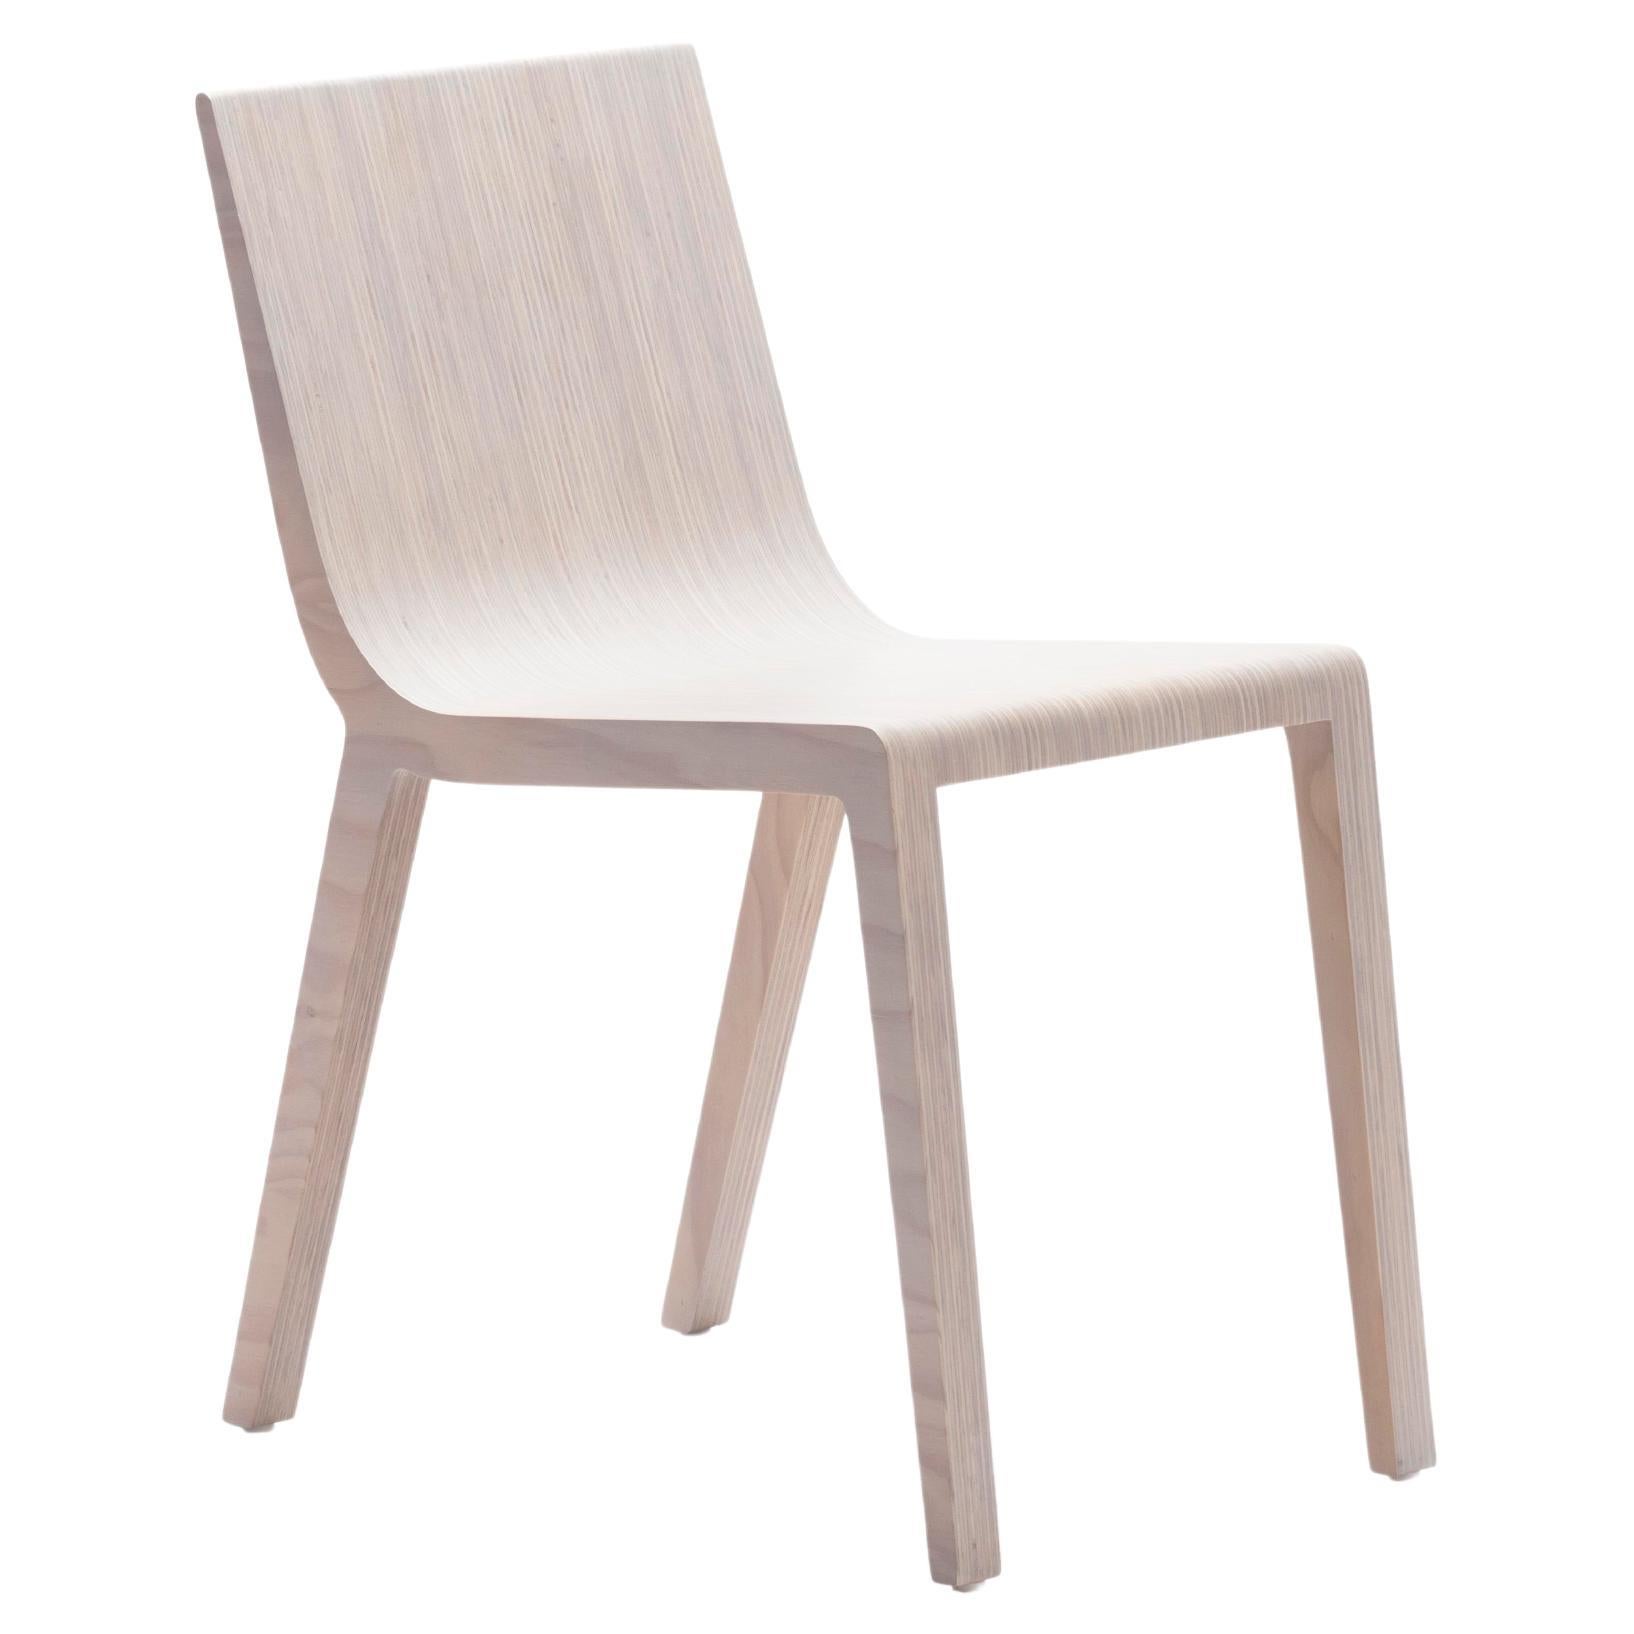 Y Chair by Piegatto, a Contemporary and Minimalist Chair For Sale